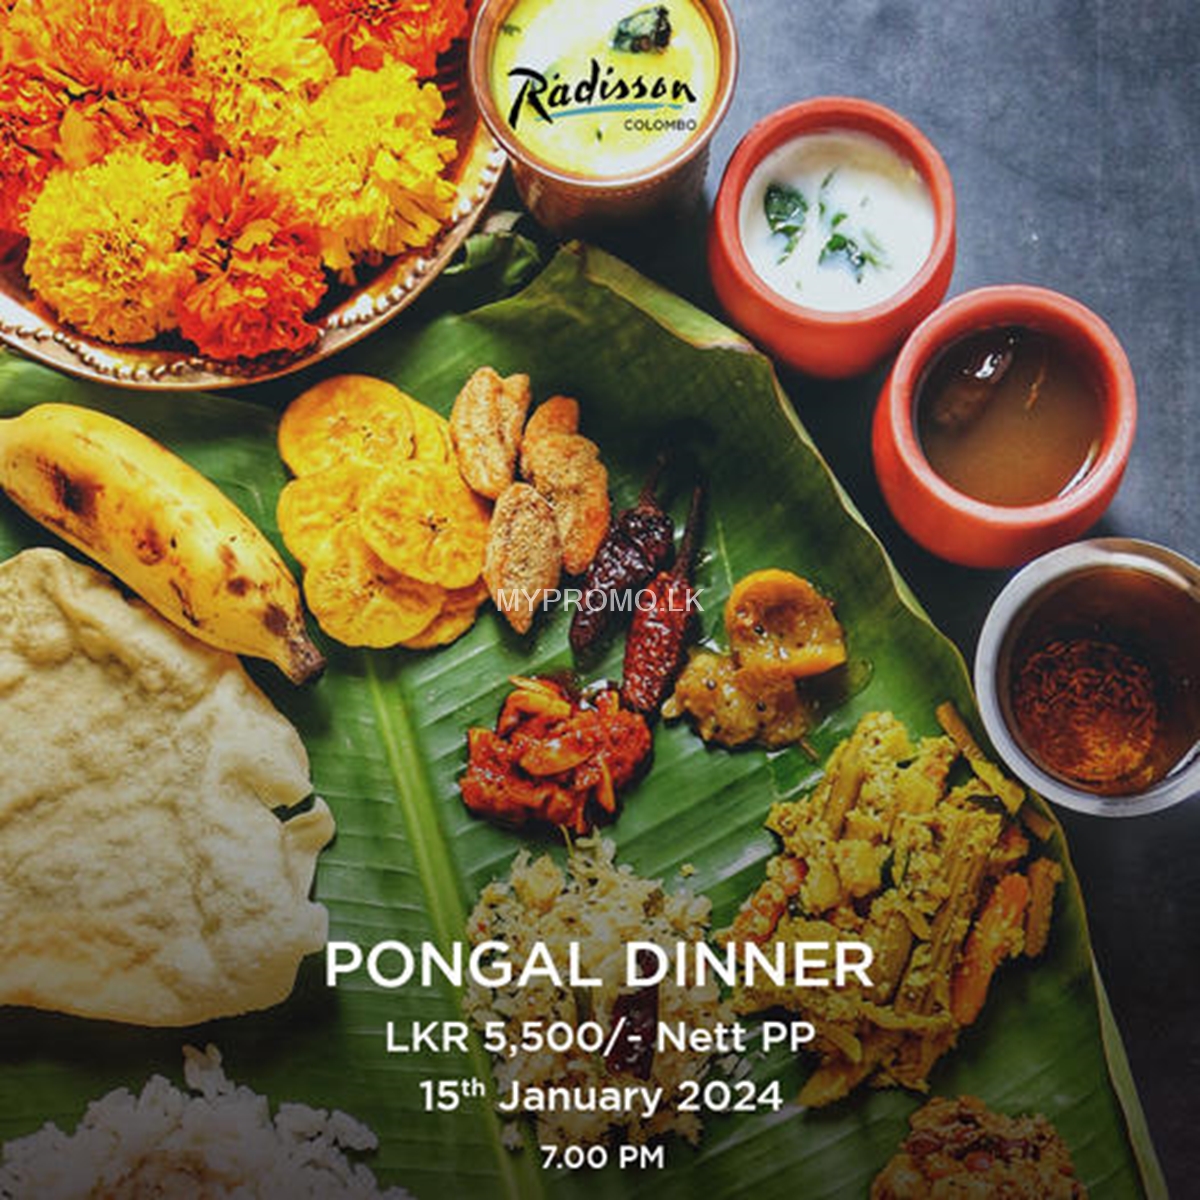 Pongal dinner buffet at Radisson Hotel Colombo